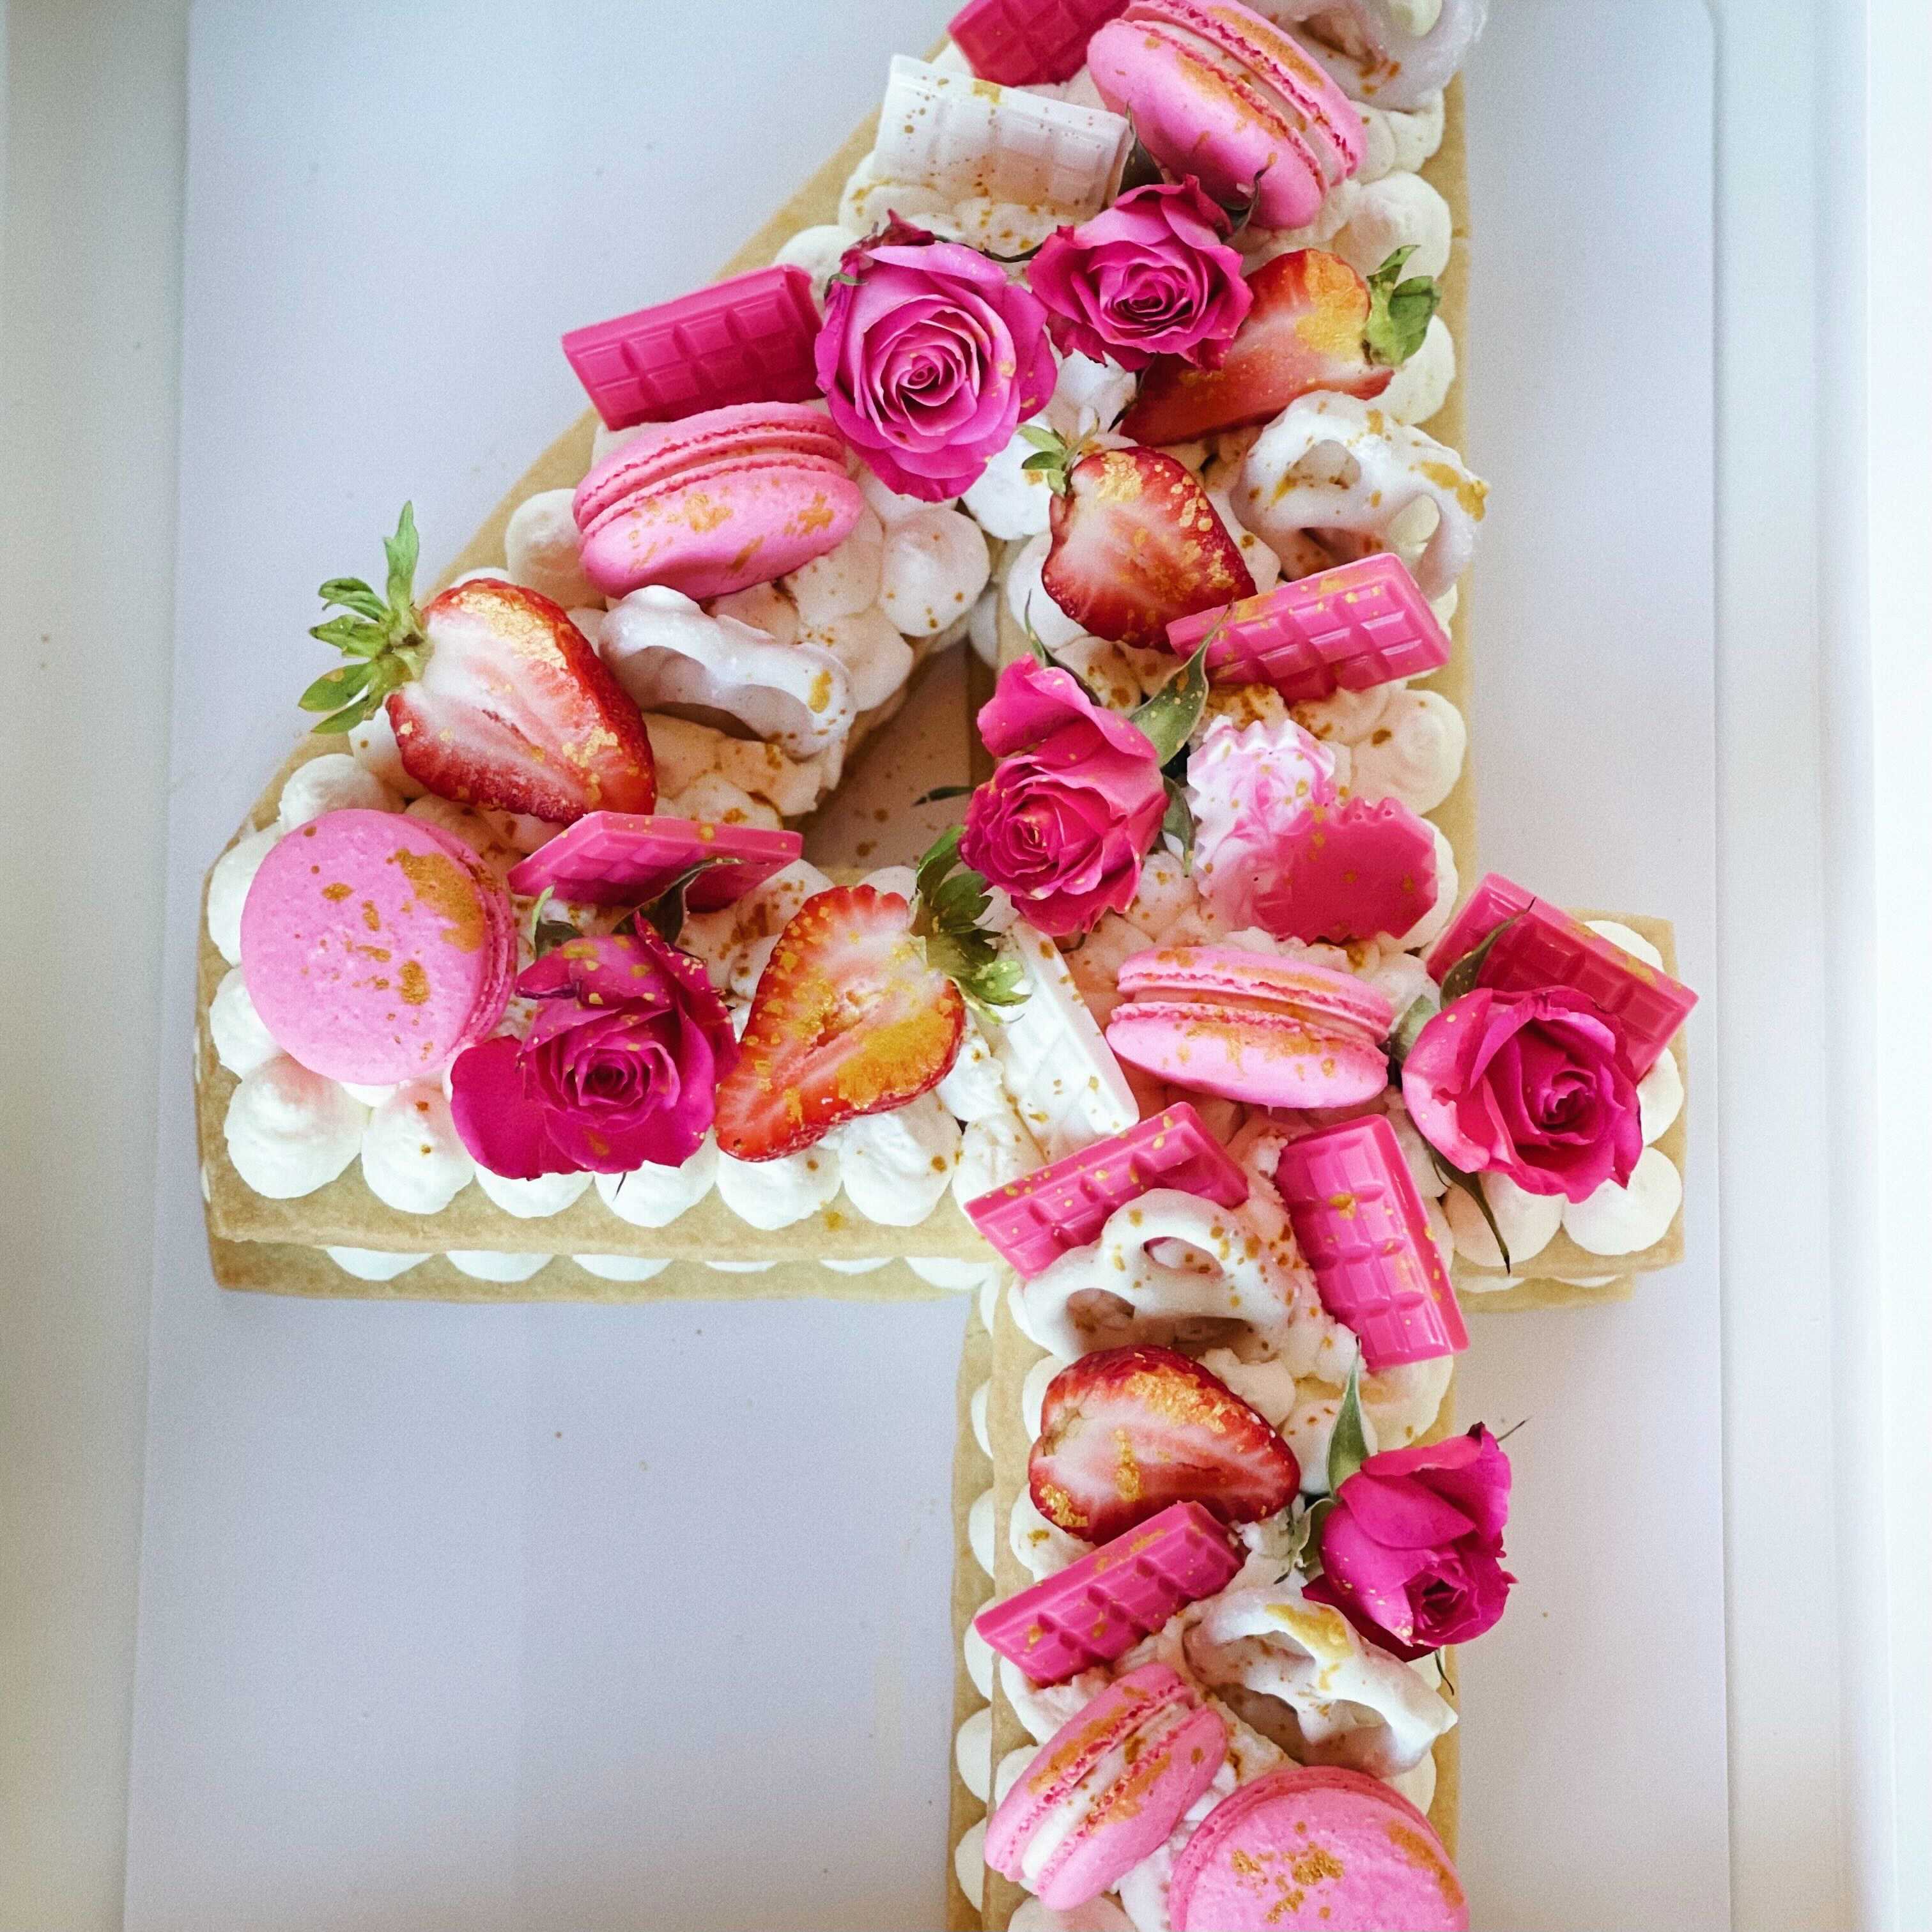 LETTER CAKES – THE CHEF PATISSIER